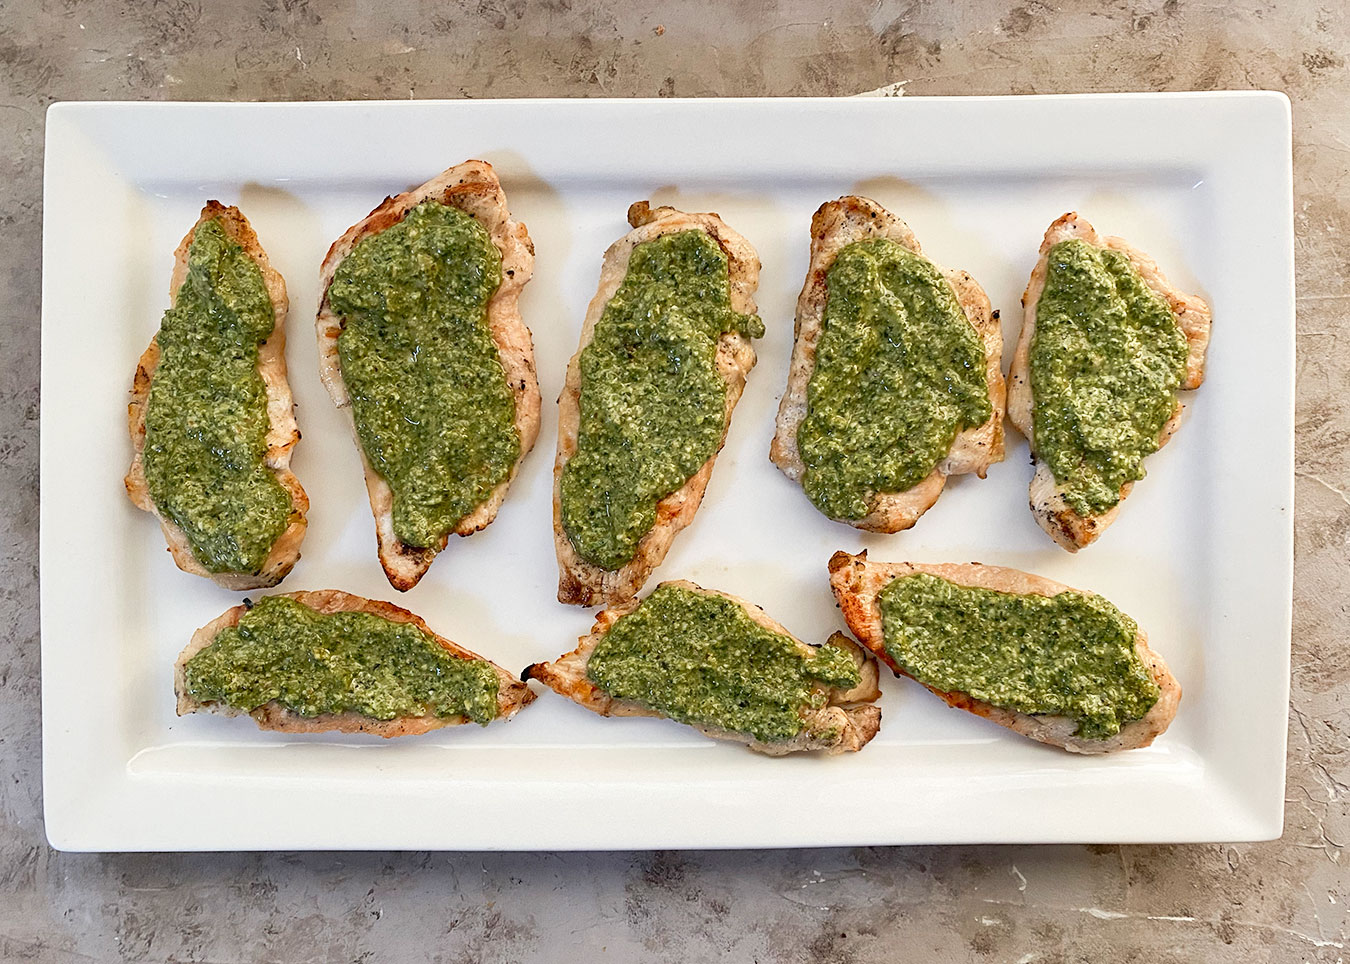 Grilled chicken breasts topped with homemade pesto sauce